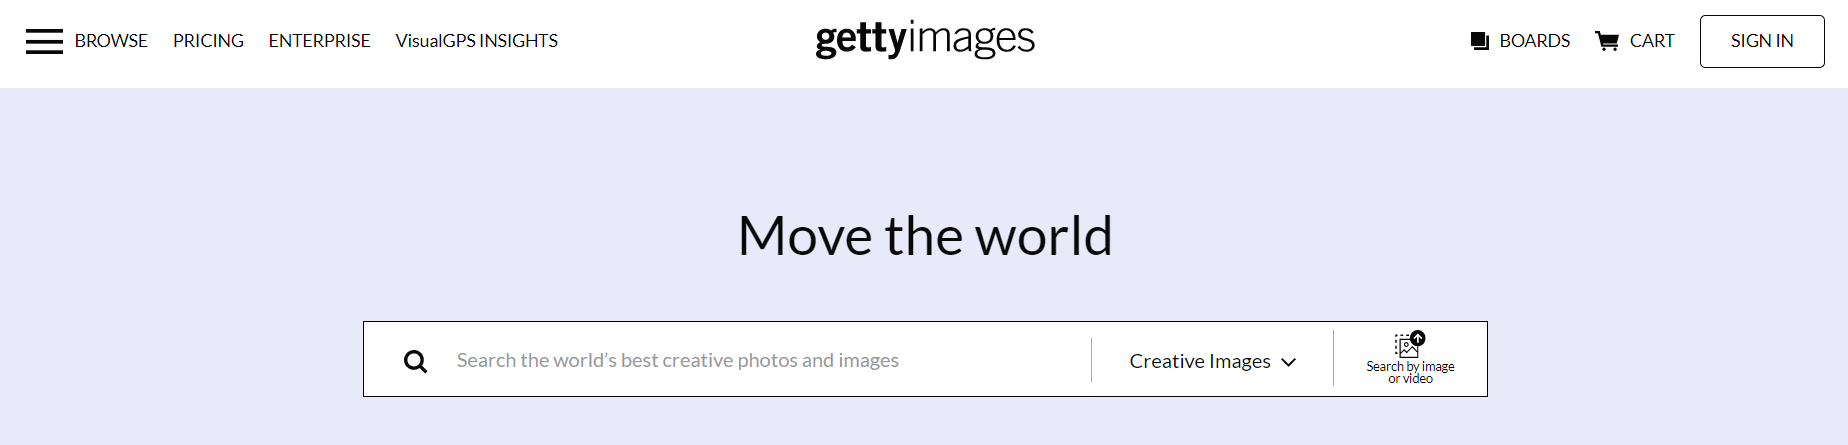 Фотобанк Getty Images